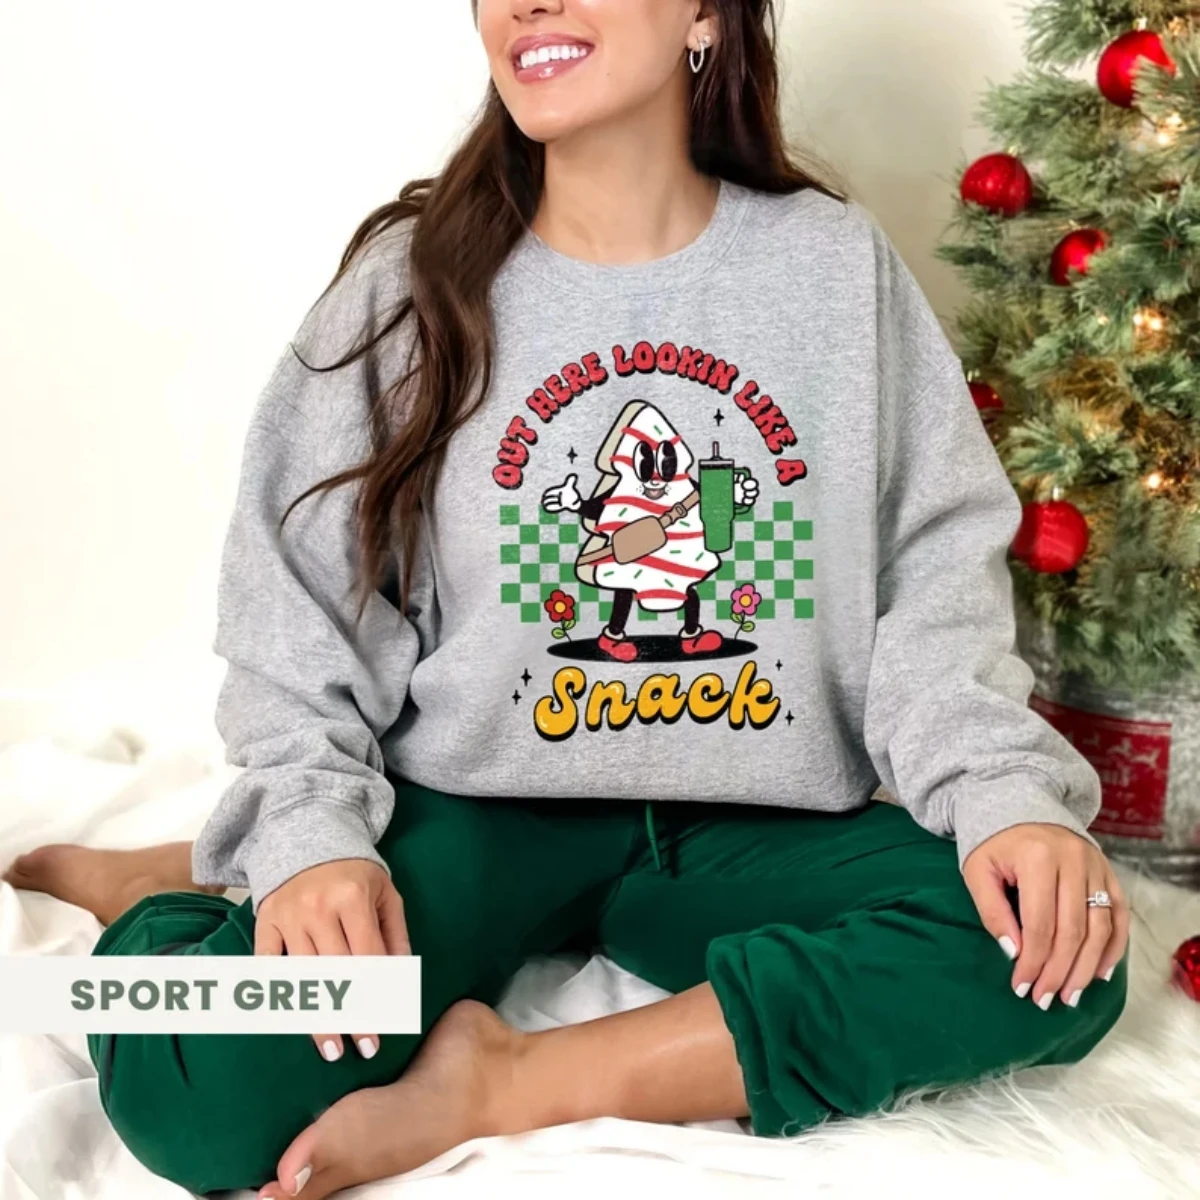 Funny Christmas Sweatshirt Out Here Looking Like A Snack Cake Pullover Shirt Little Debbie Christmas Tree Cake Winter Clothes like a snack christmas print sweatshirt casual long sleeve crew neck pullover top winter clothes women